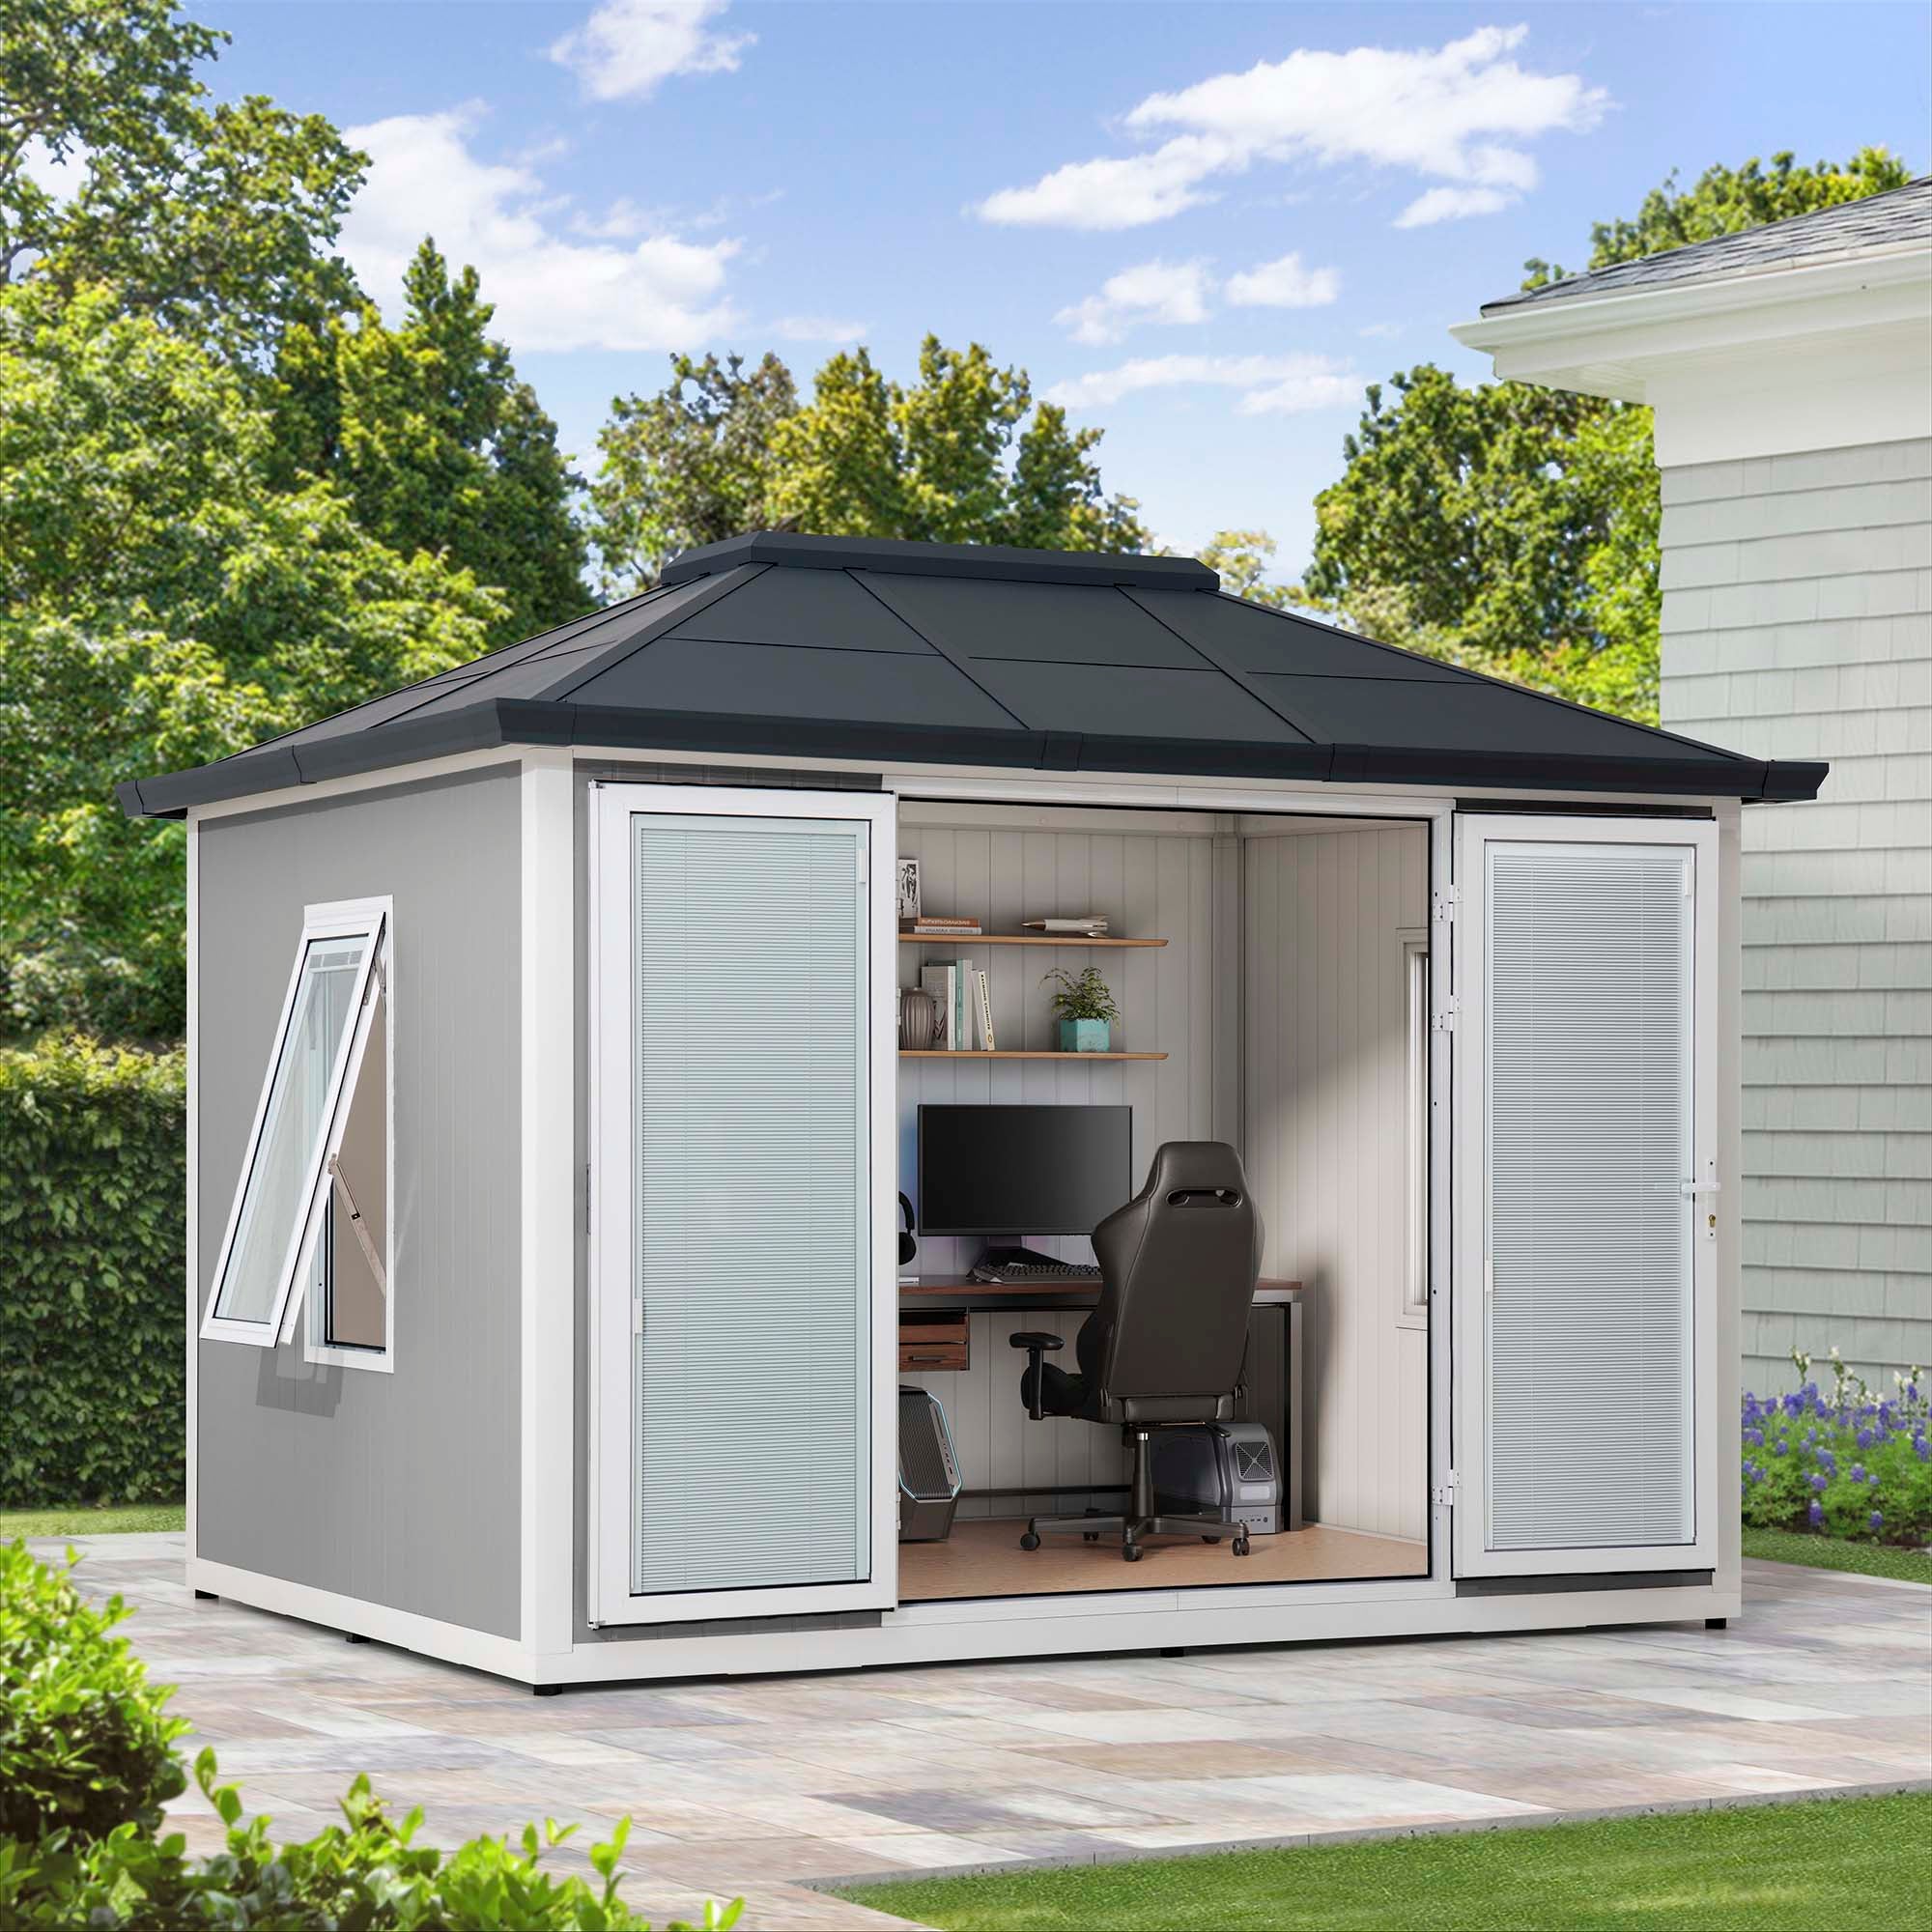 Sunjoy Esquire, Beyond Shed, 10&#039;x12.6&#039; Backyard Office Shed, Outdoor Storge Shed with Floors, 2 Windows, and Lockable Doors